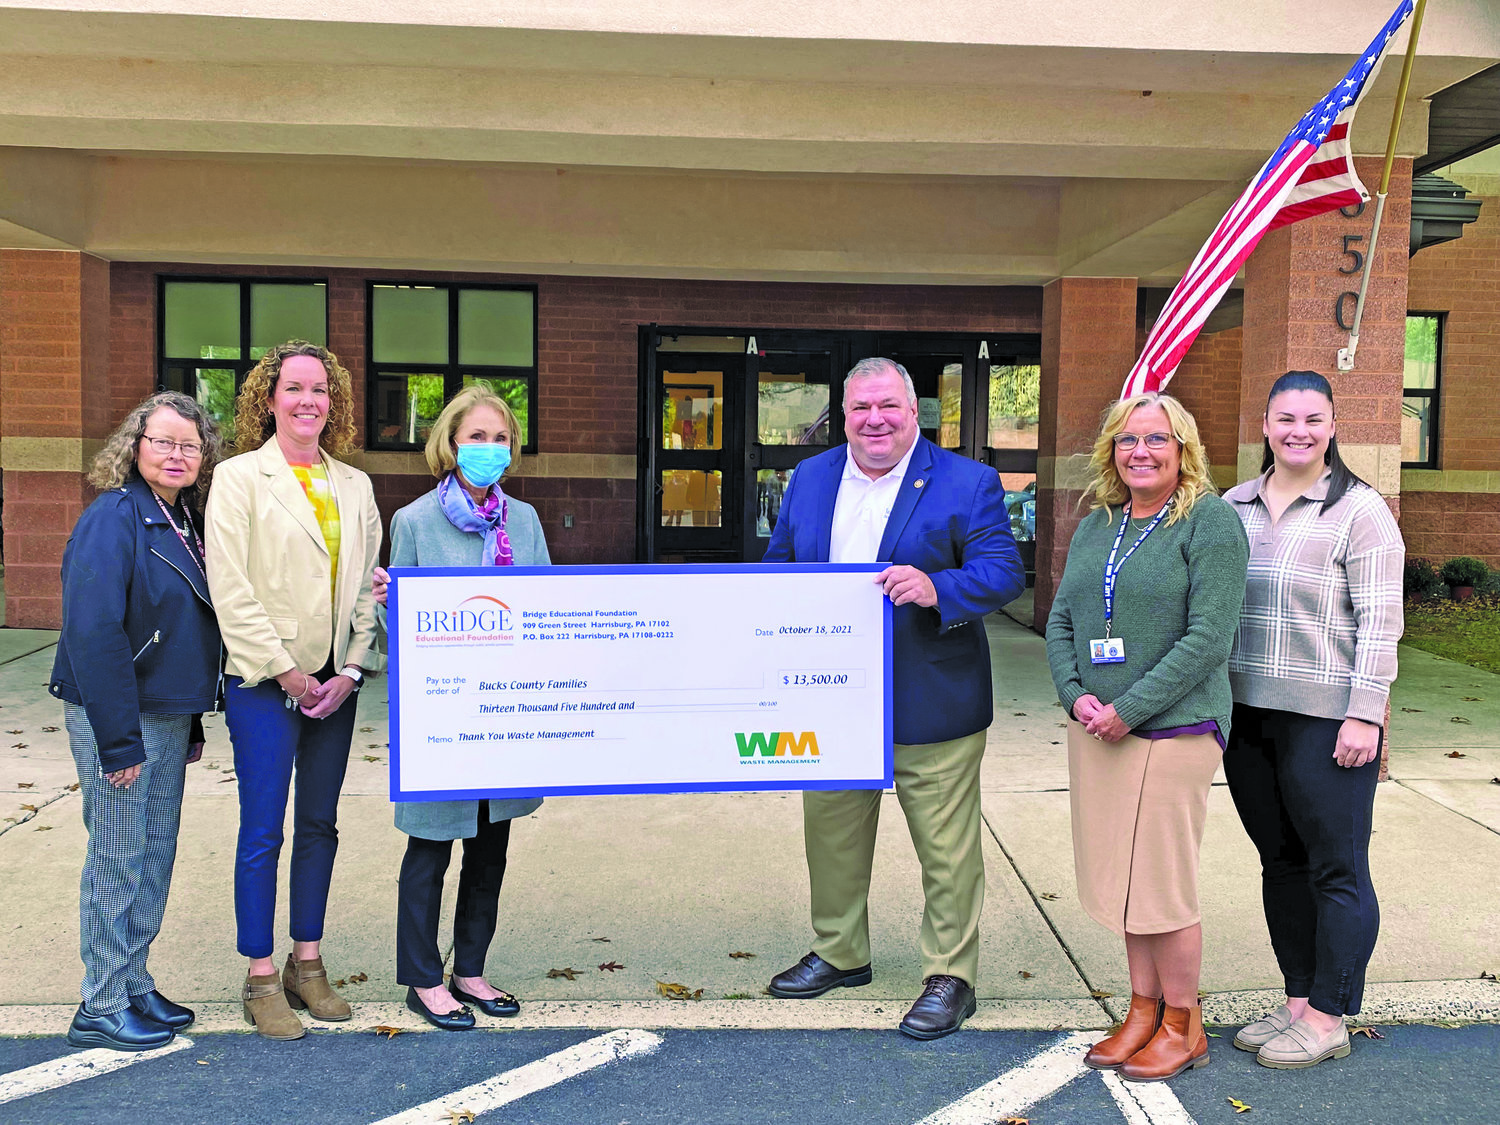 From left are: Kathy Williamson, St. Joseph/St. Robert School; Dorothy Aschenbrenner, St. Joseph/St. Robert School; Judy Archibald, Waste Management; state Rep. Todd Polinchock; Barbara Riley, Our Lady of Good Counsel; and Marina McCann, Our Lady of Good Counsel.